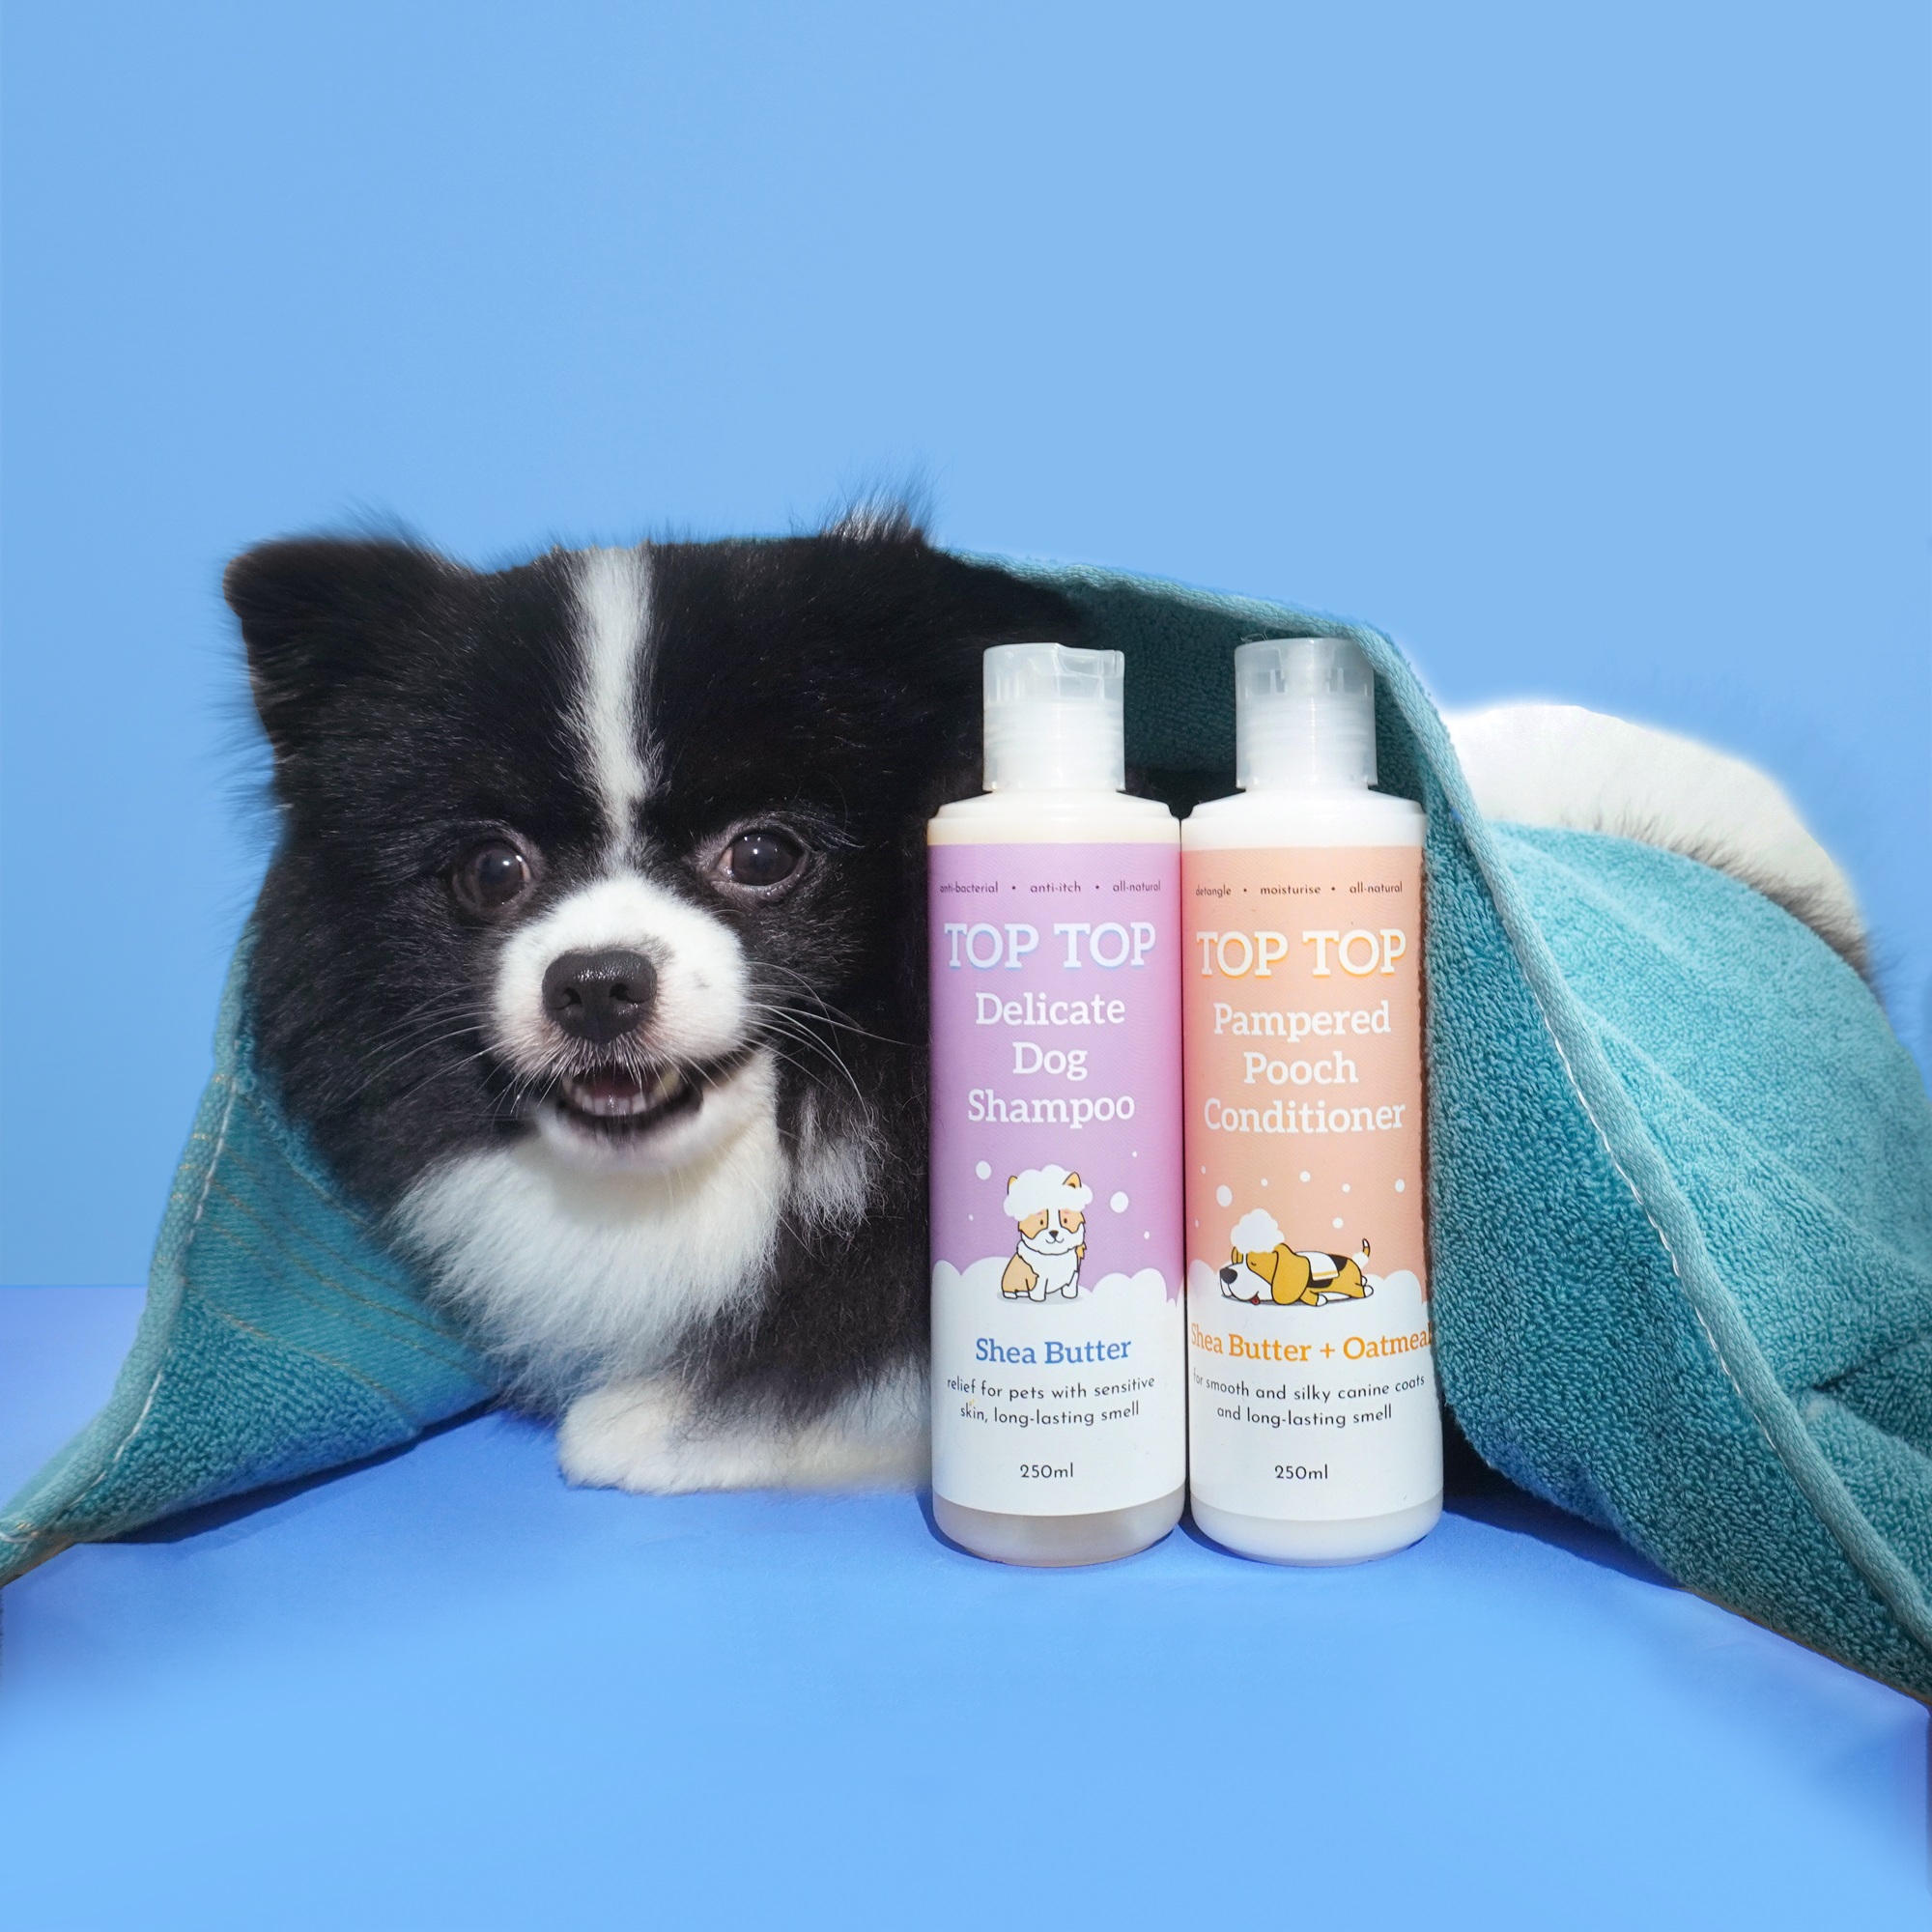 Pawjourr Reviews: Top Top “Delicate Dog” Shampoo and “Pampered Pooch” Conditioner